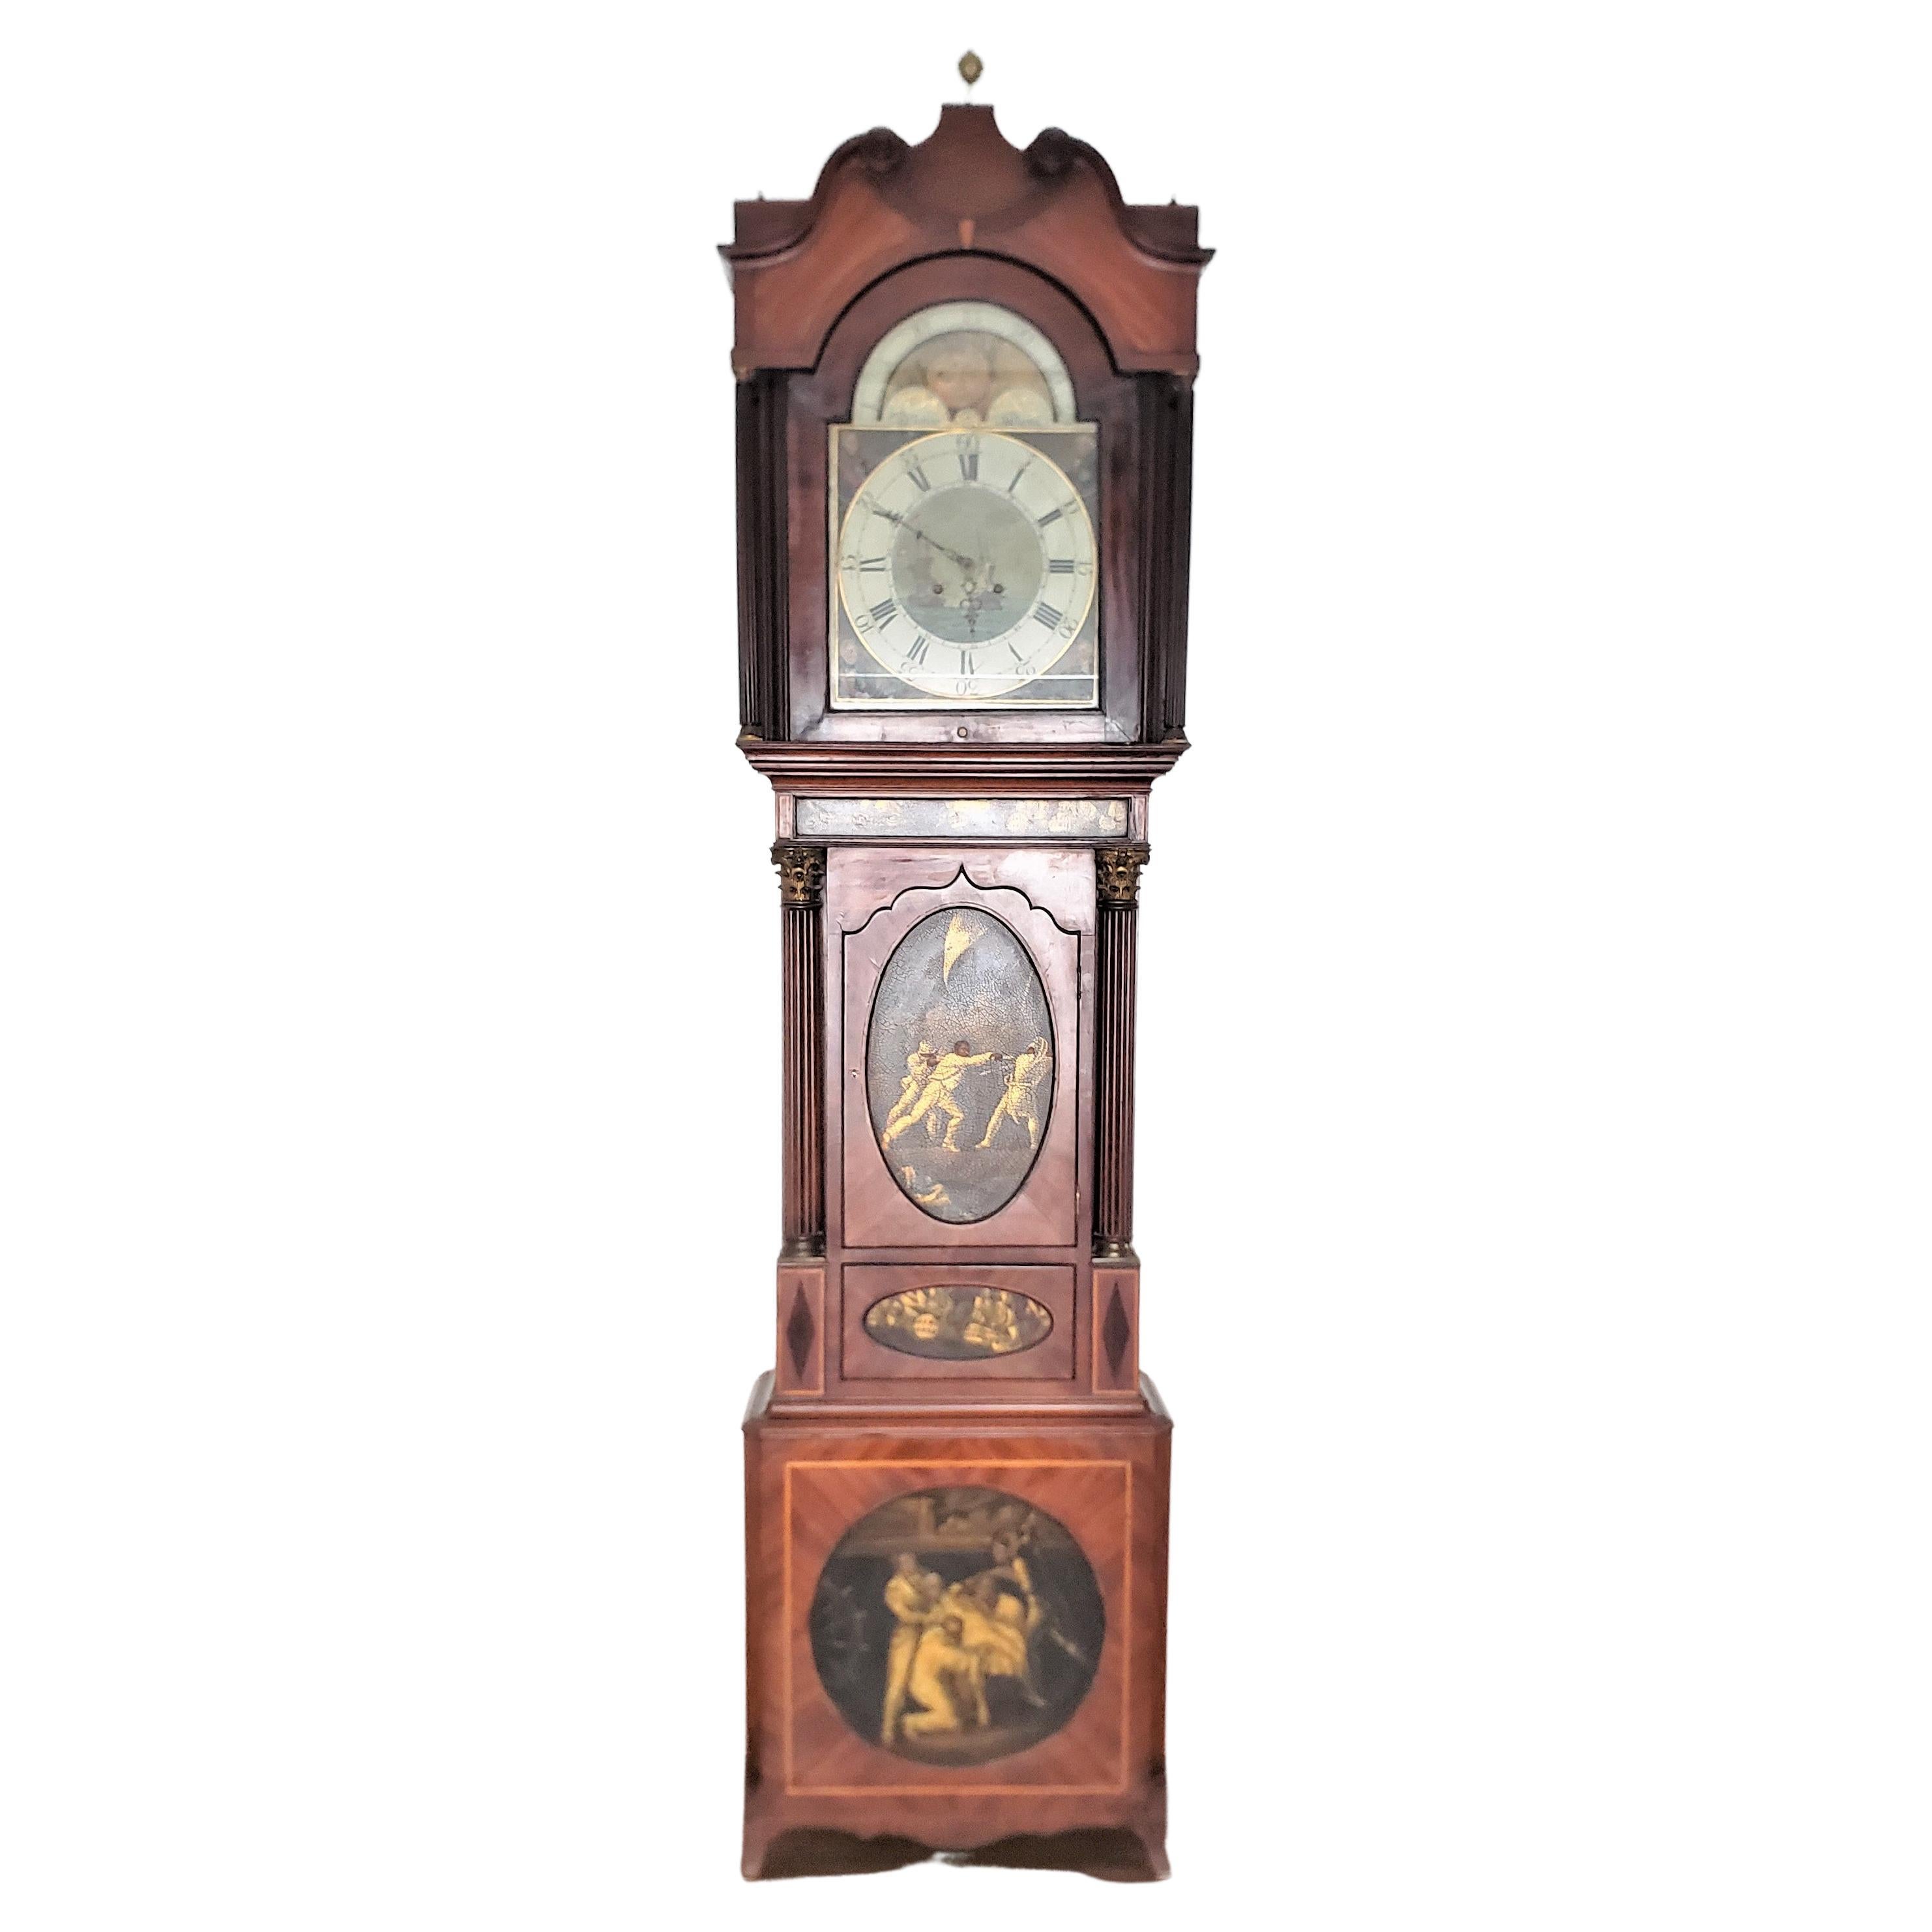 Large Antique Hand-Painted English Grandfather Clock Commemorating Lord Nelson